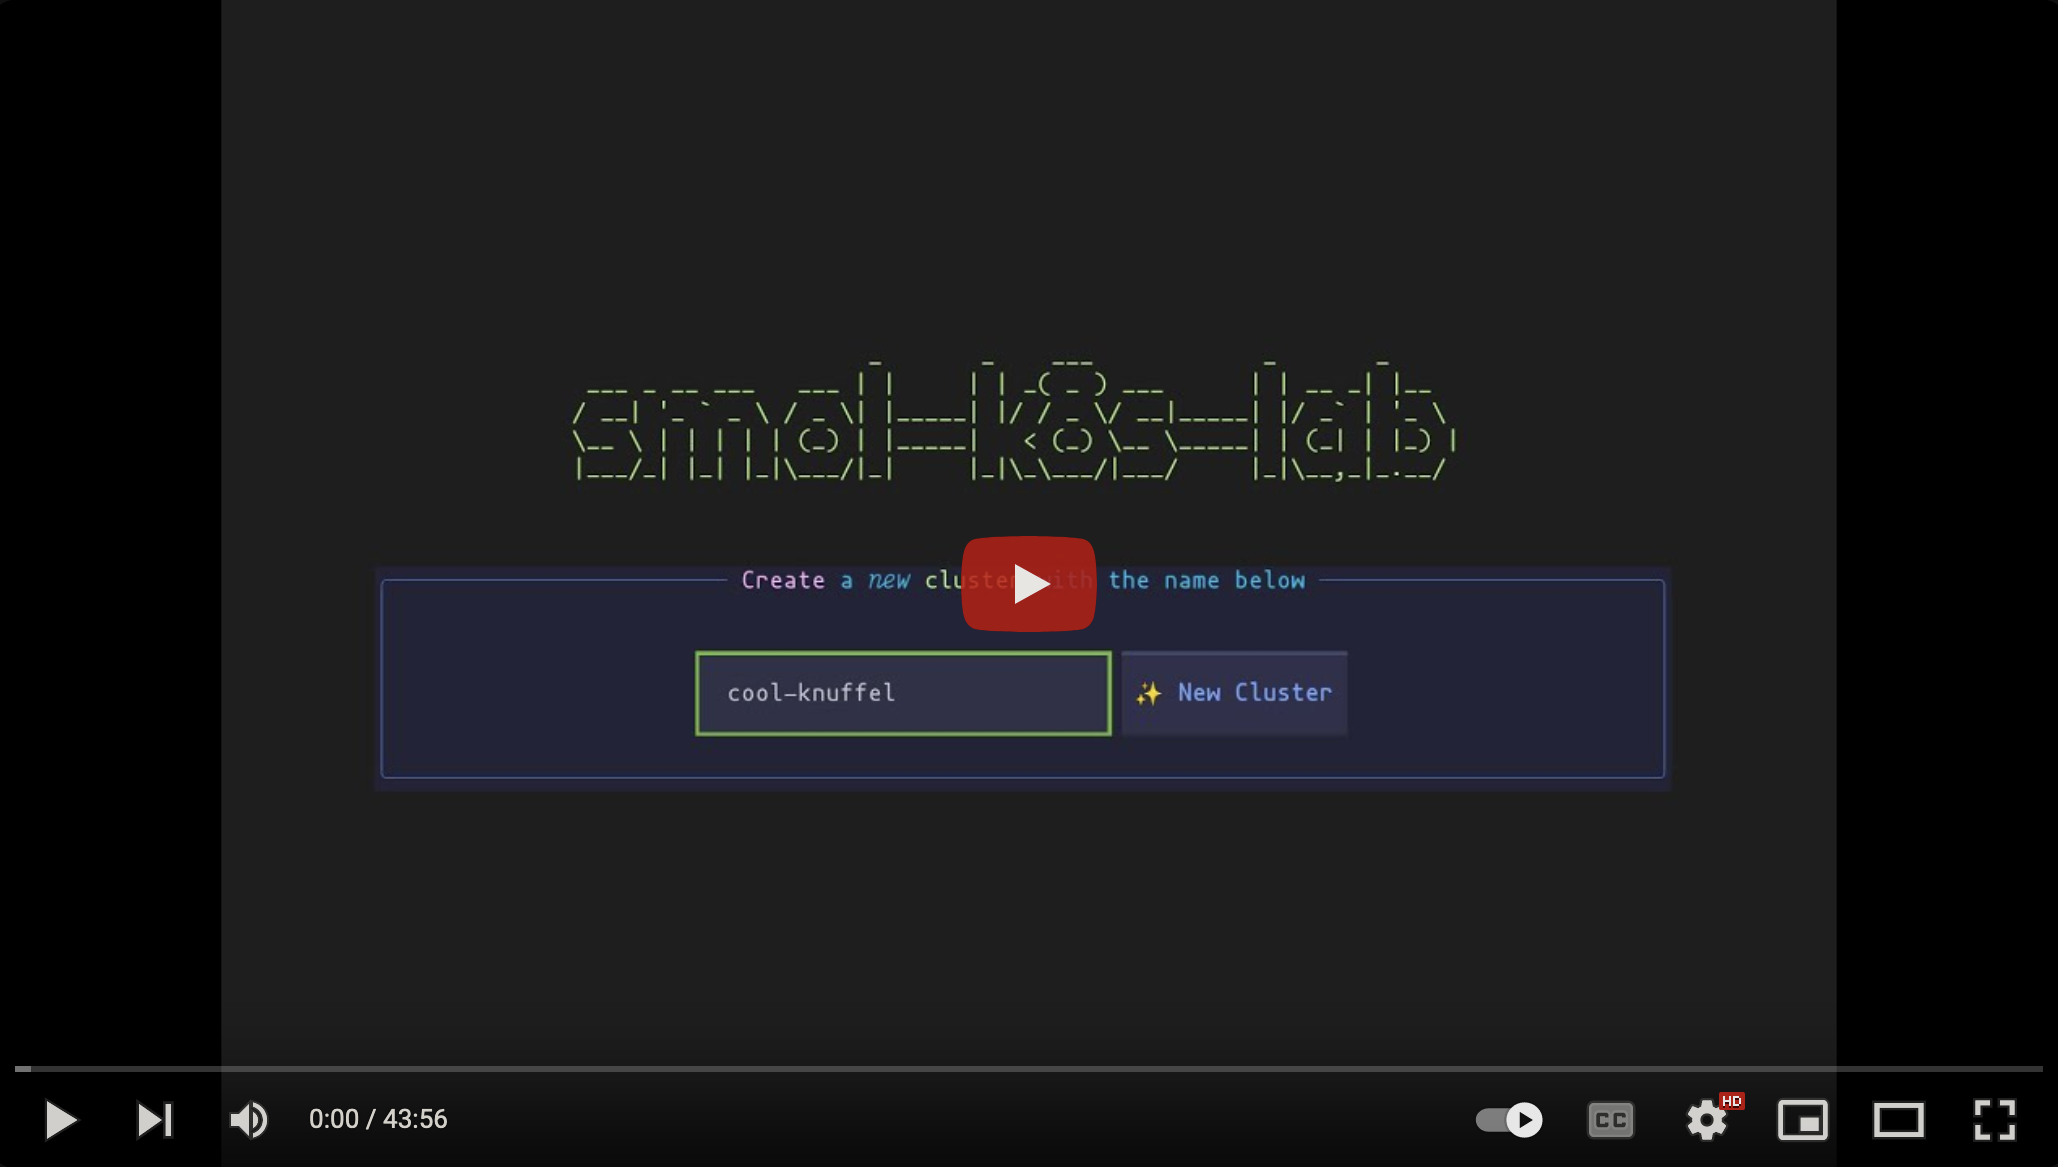 Screenshot of smol-k8s-lab (on the welcome screen) in a video tutorial on youtube. please click this image, as it is a link to youtube where I explain everything about smol-k8s-lab. The video image screenshot shows the smol-k8s-lab create a cluster feature which is a text input